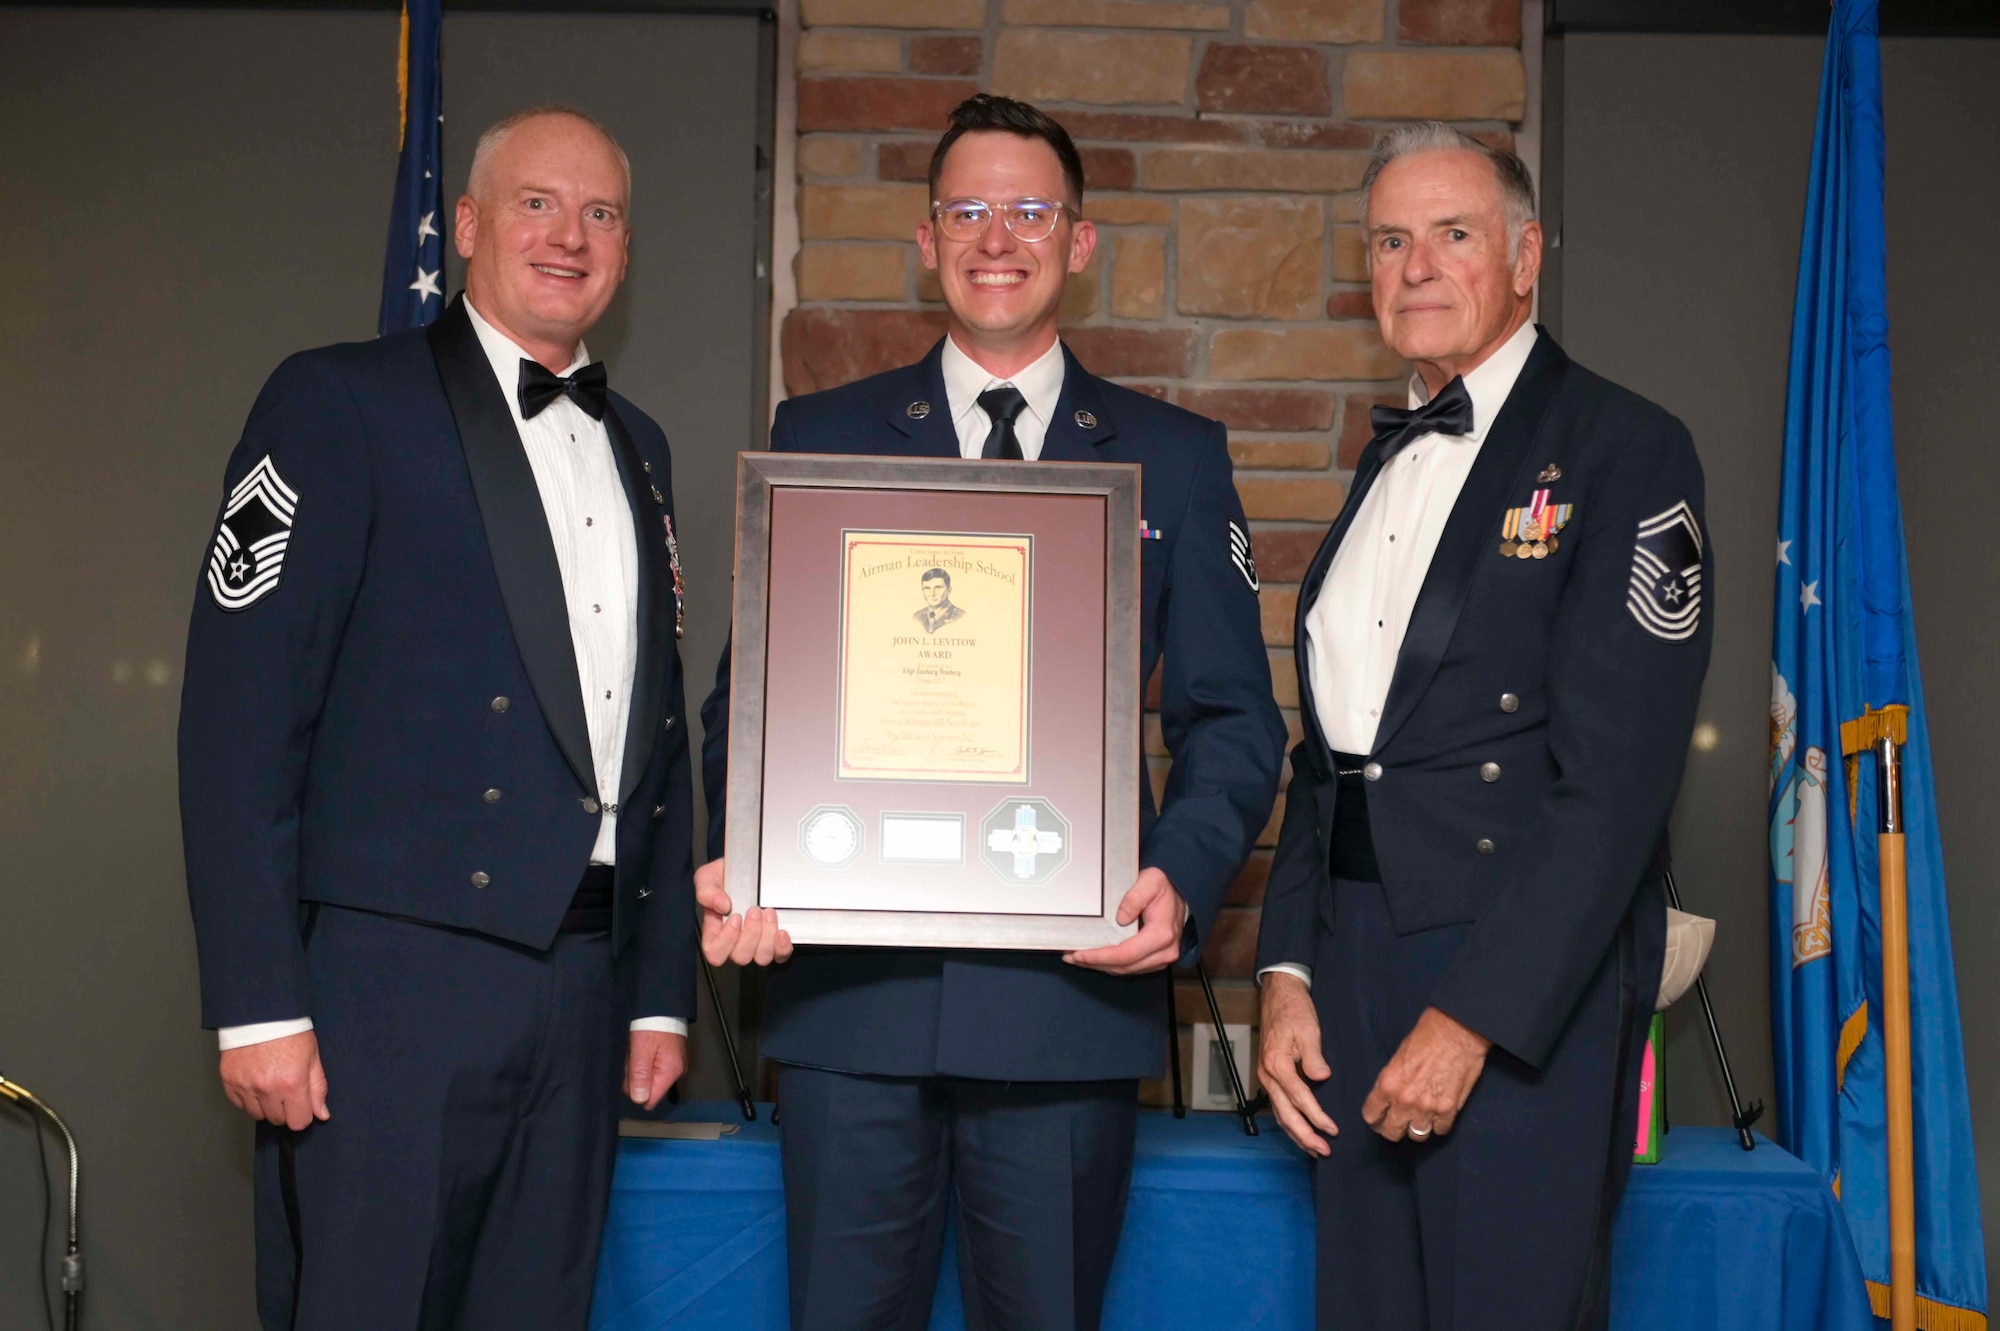 U.S. Air Force Staff Sgt. Zachary Freeberg, center, accepts the John L. Levitow Award from U.S. Air Force Chief Master Sgt. Mark Teusch, 49th Component Maintenance Squadron senior enlisted leader, left, and retired U.S. Air Force Chief Master Sgt. Mac during an Airman Leadership School graduation at Holloman Air Force Base, New Mexico, Sept. 22, 2022. The Levitow award is presented to the student demonstrating the highest level of leadership and scholastic performance, and is determined by the assignment of points by their peers. (U.S. Air Force photo by Tech. Sgt. Victor J. Caputo)